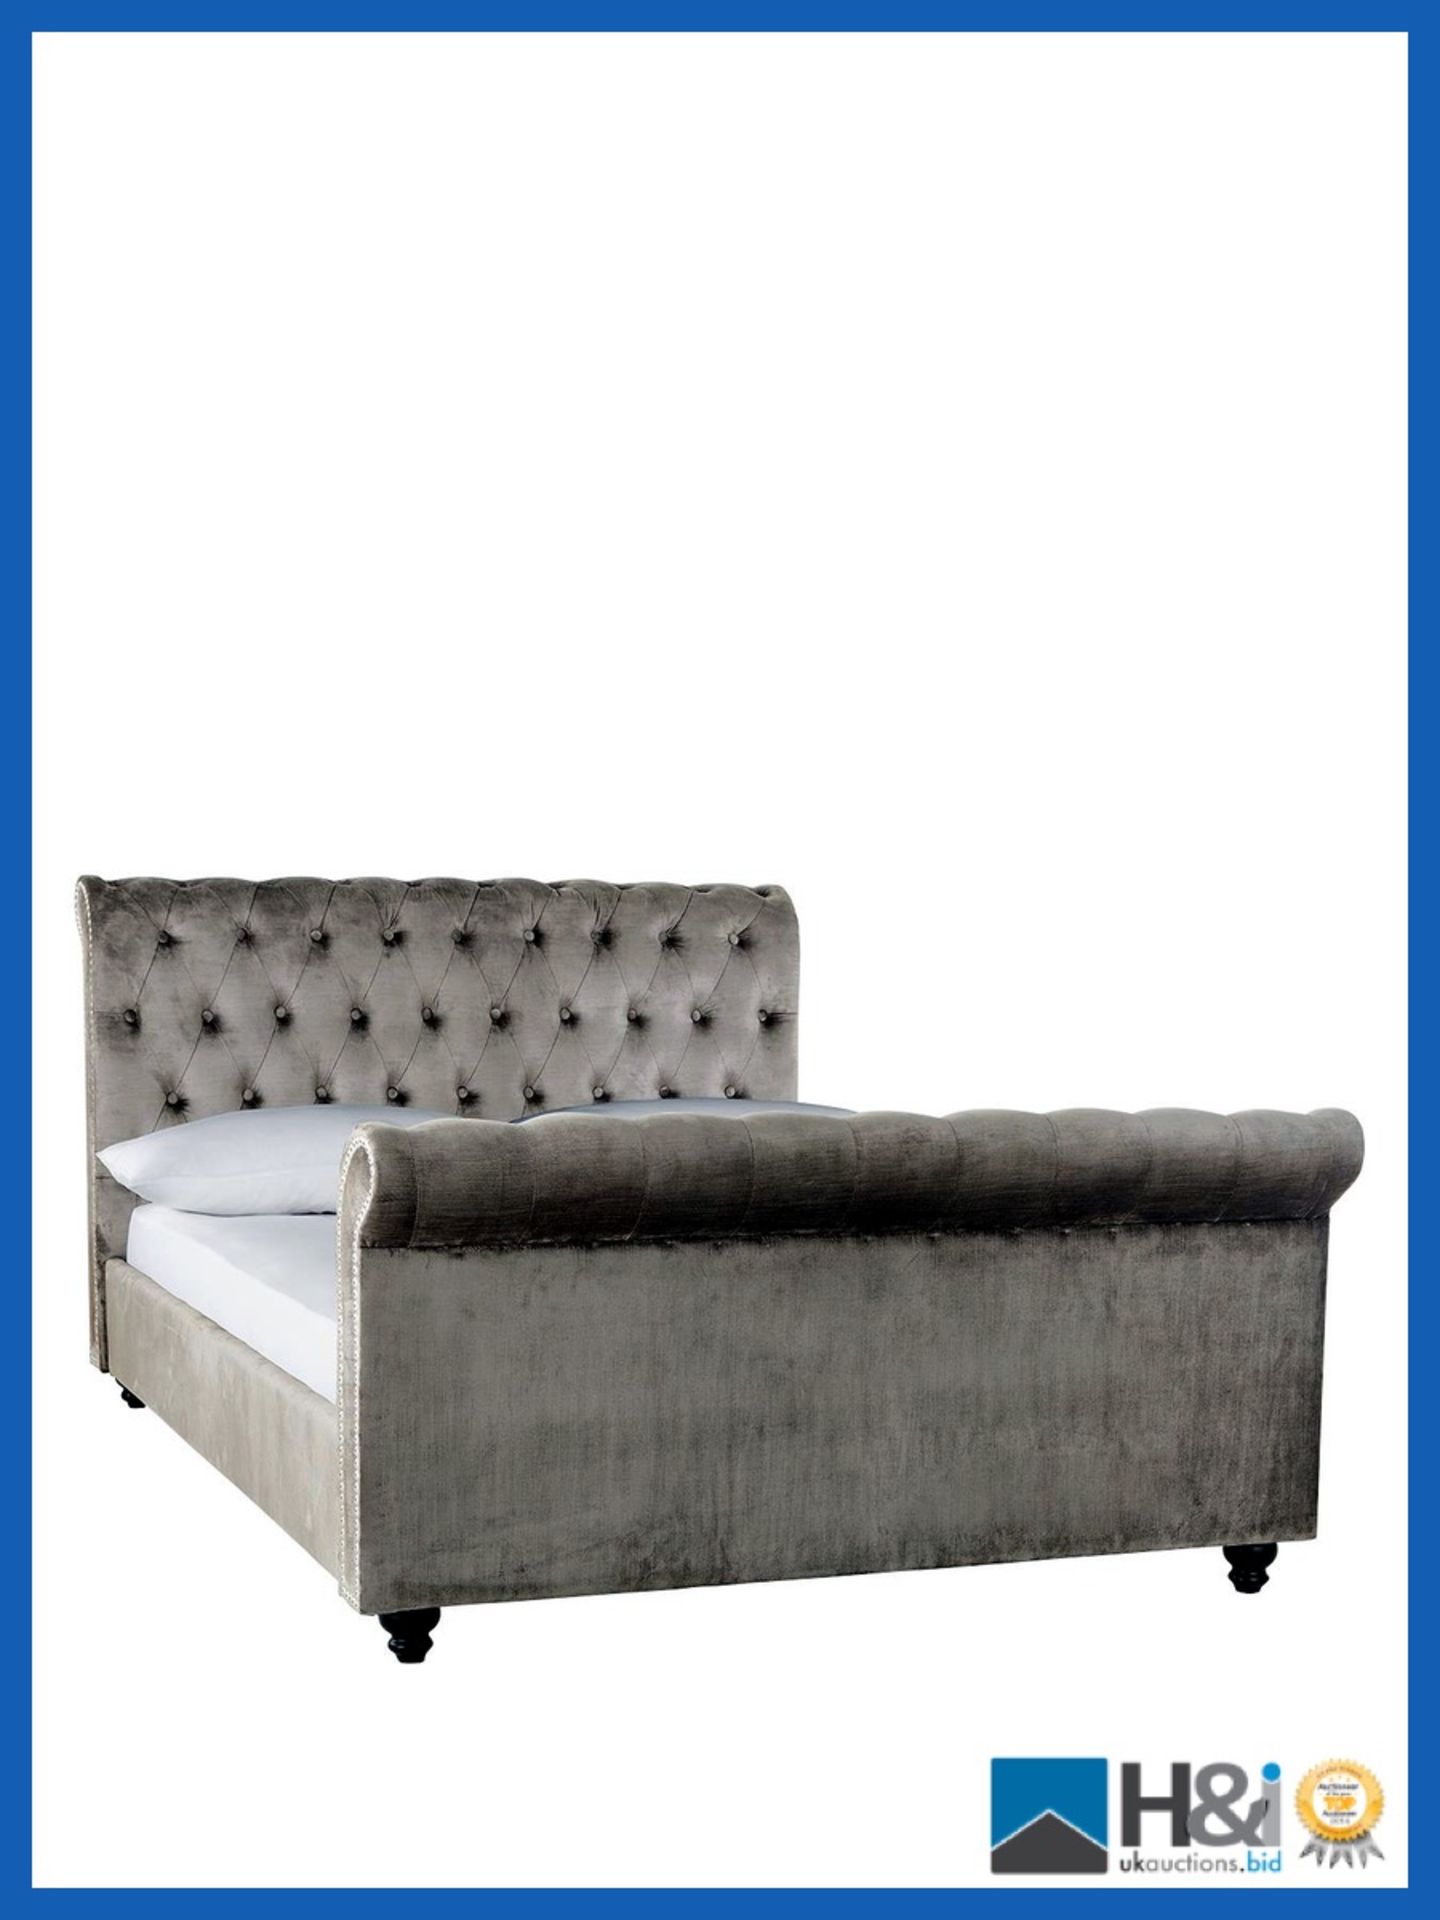 BOXED GRADE *A* ITEM WOBURN SUPER KING SCROLL BED [SILVER] 105x192x239CM RRP:GBP 1078.0